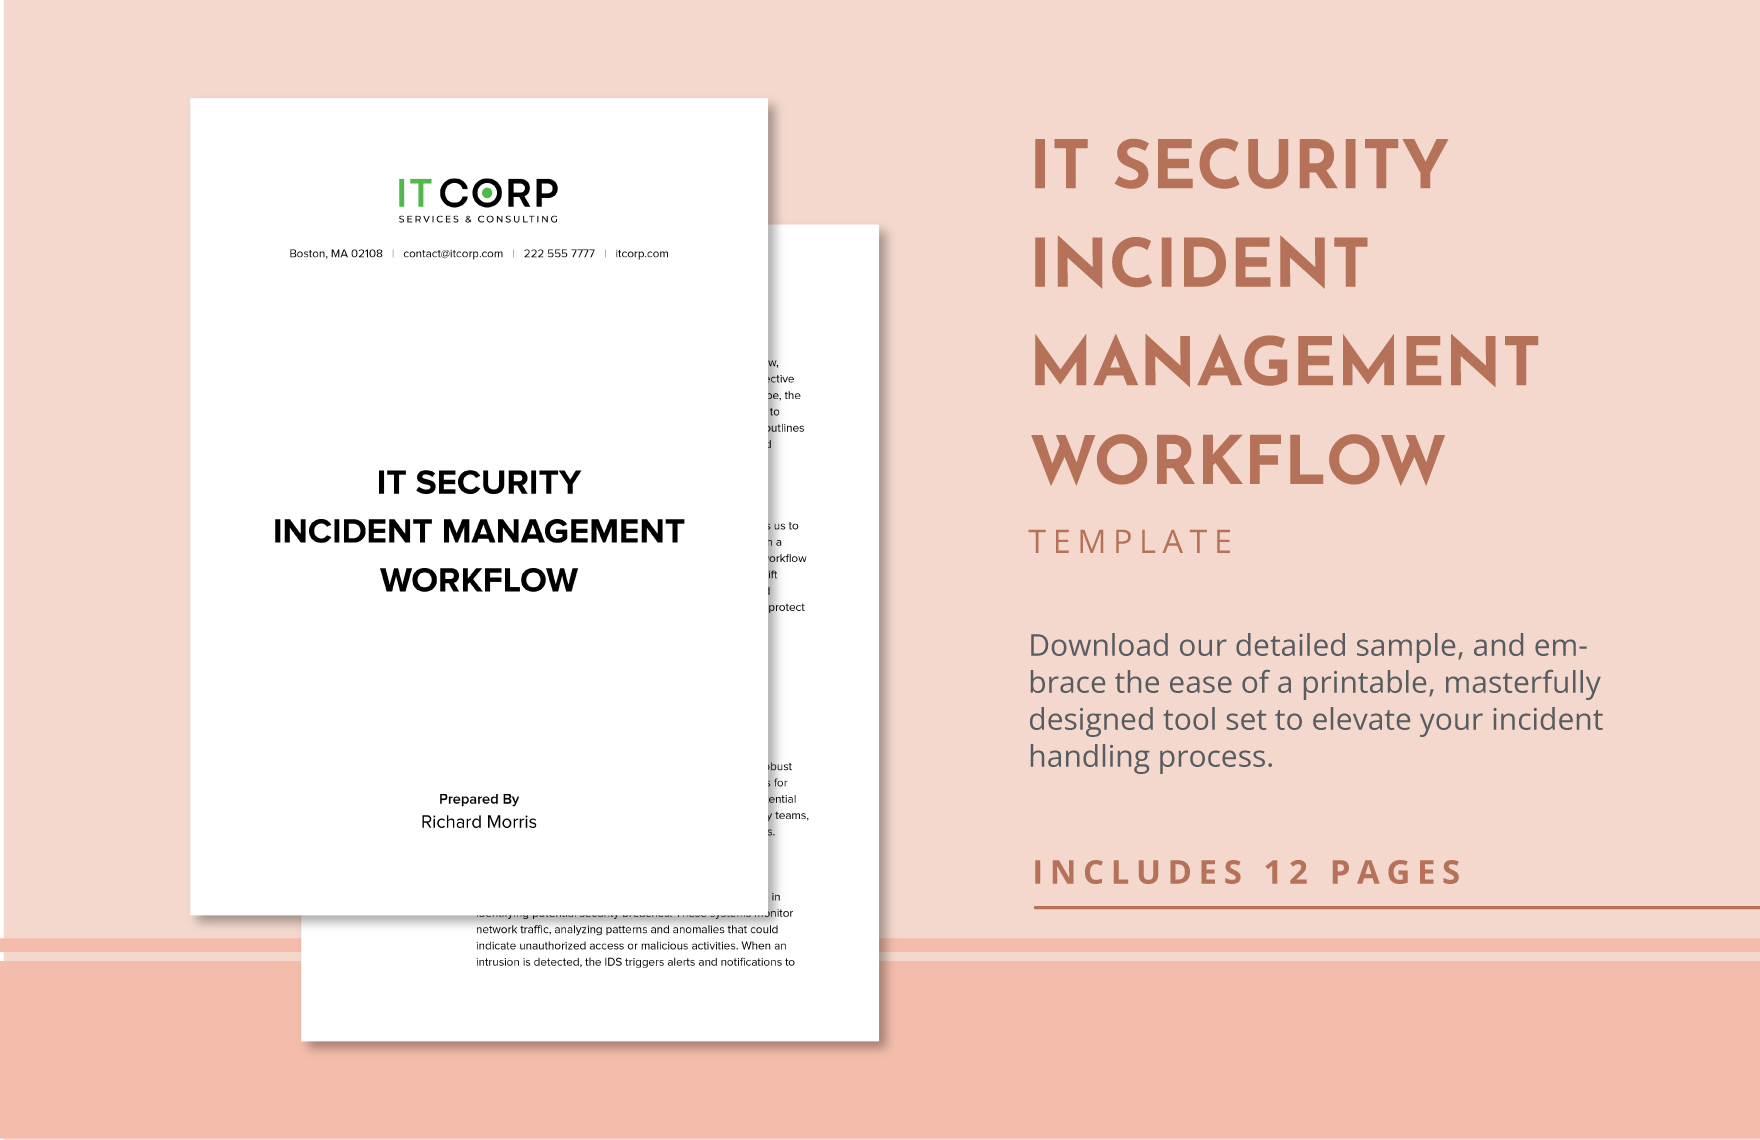 IT Security Incident Management Workflow Template in Word, Google Docs, PDF